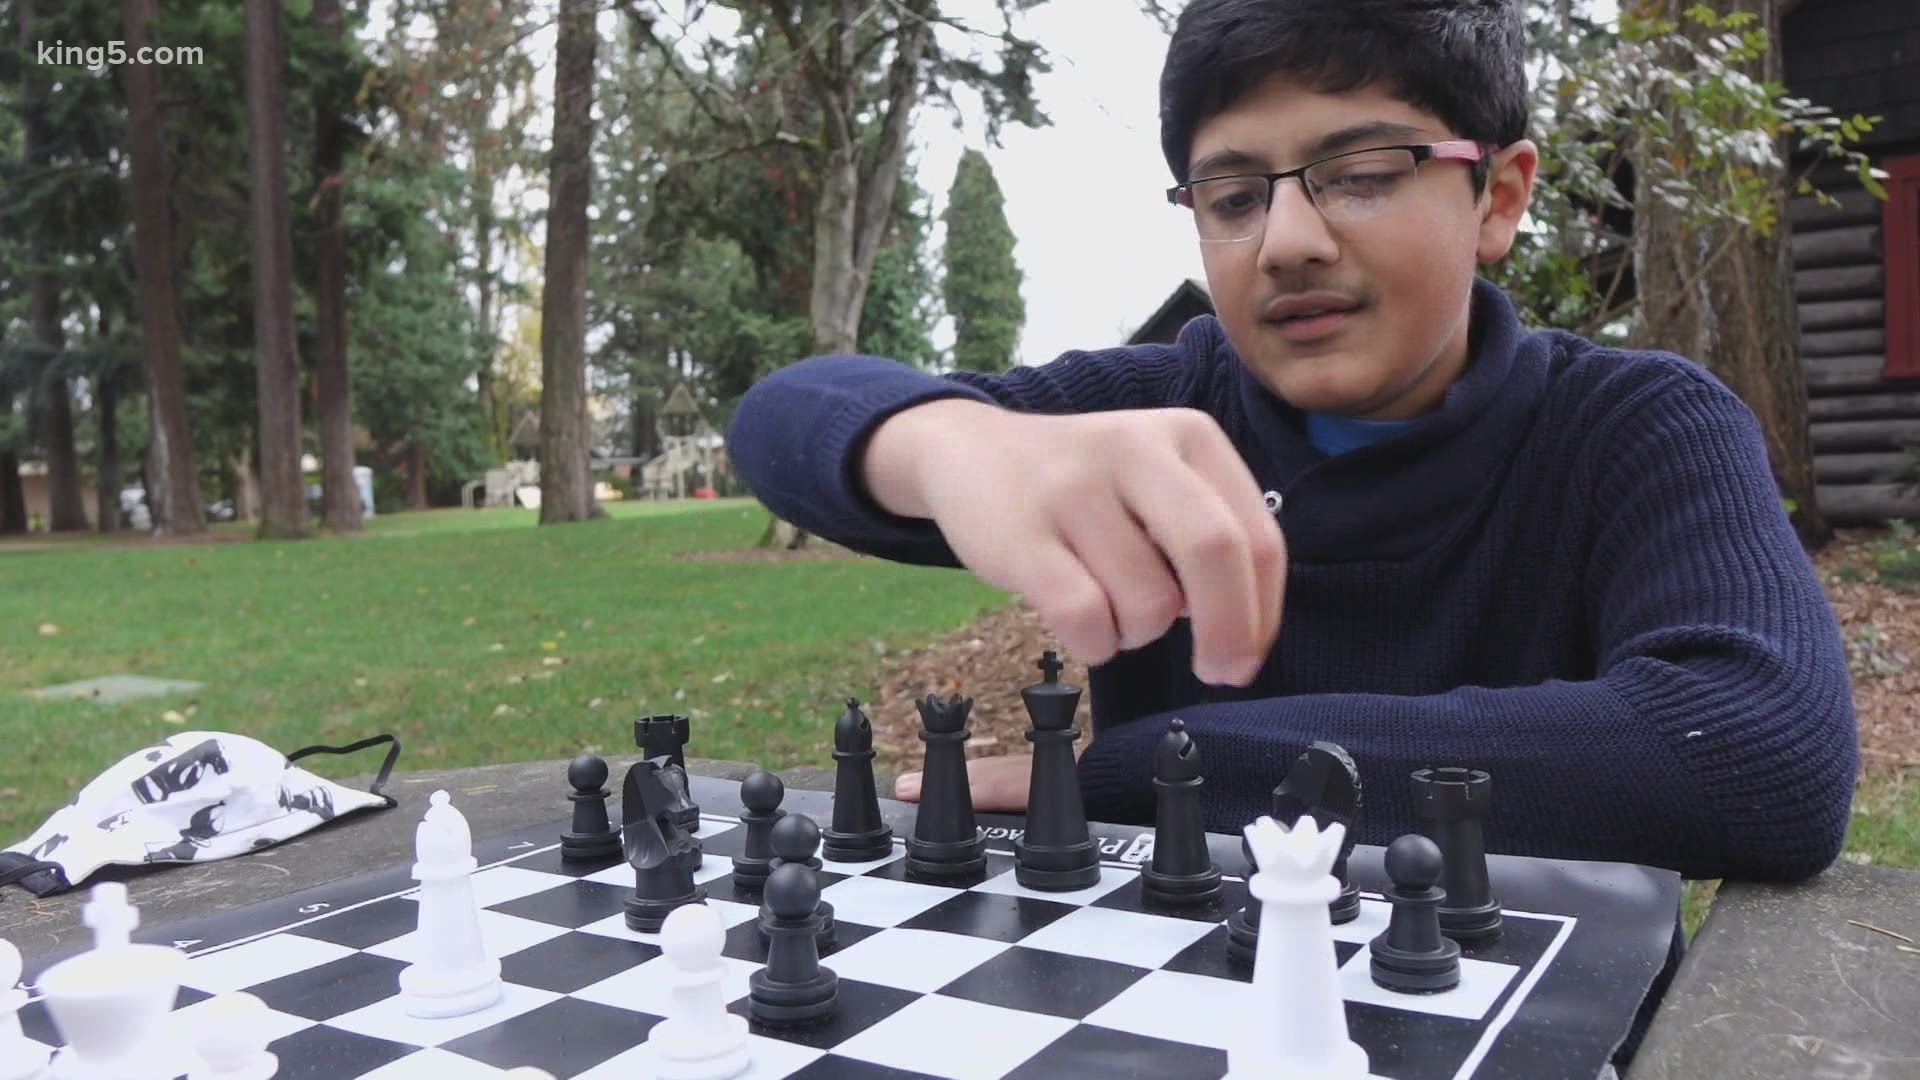 Dillon local to represent state at national senior chess championship